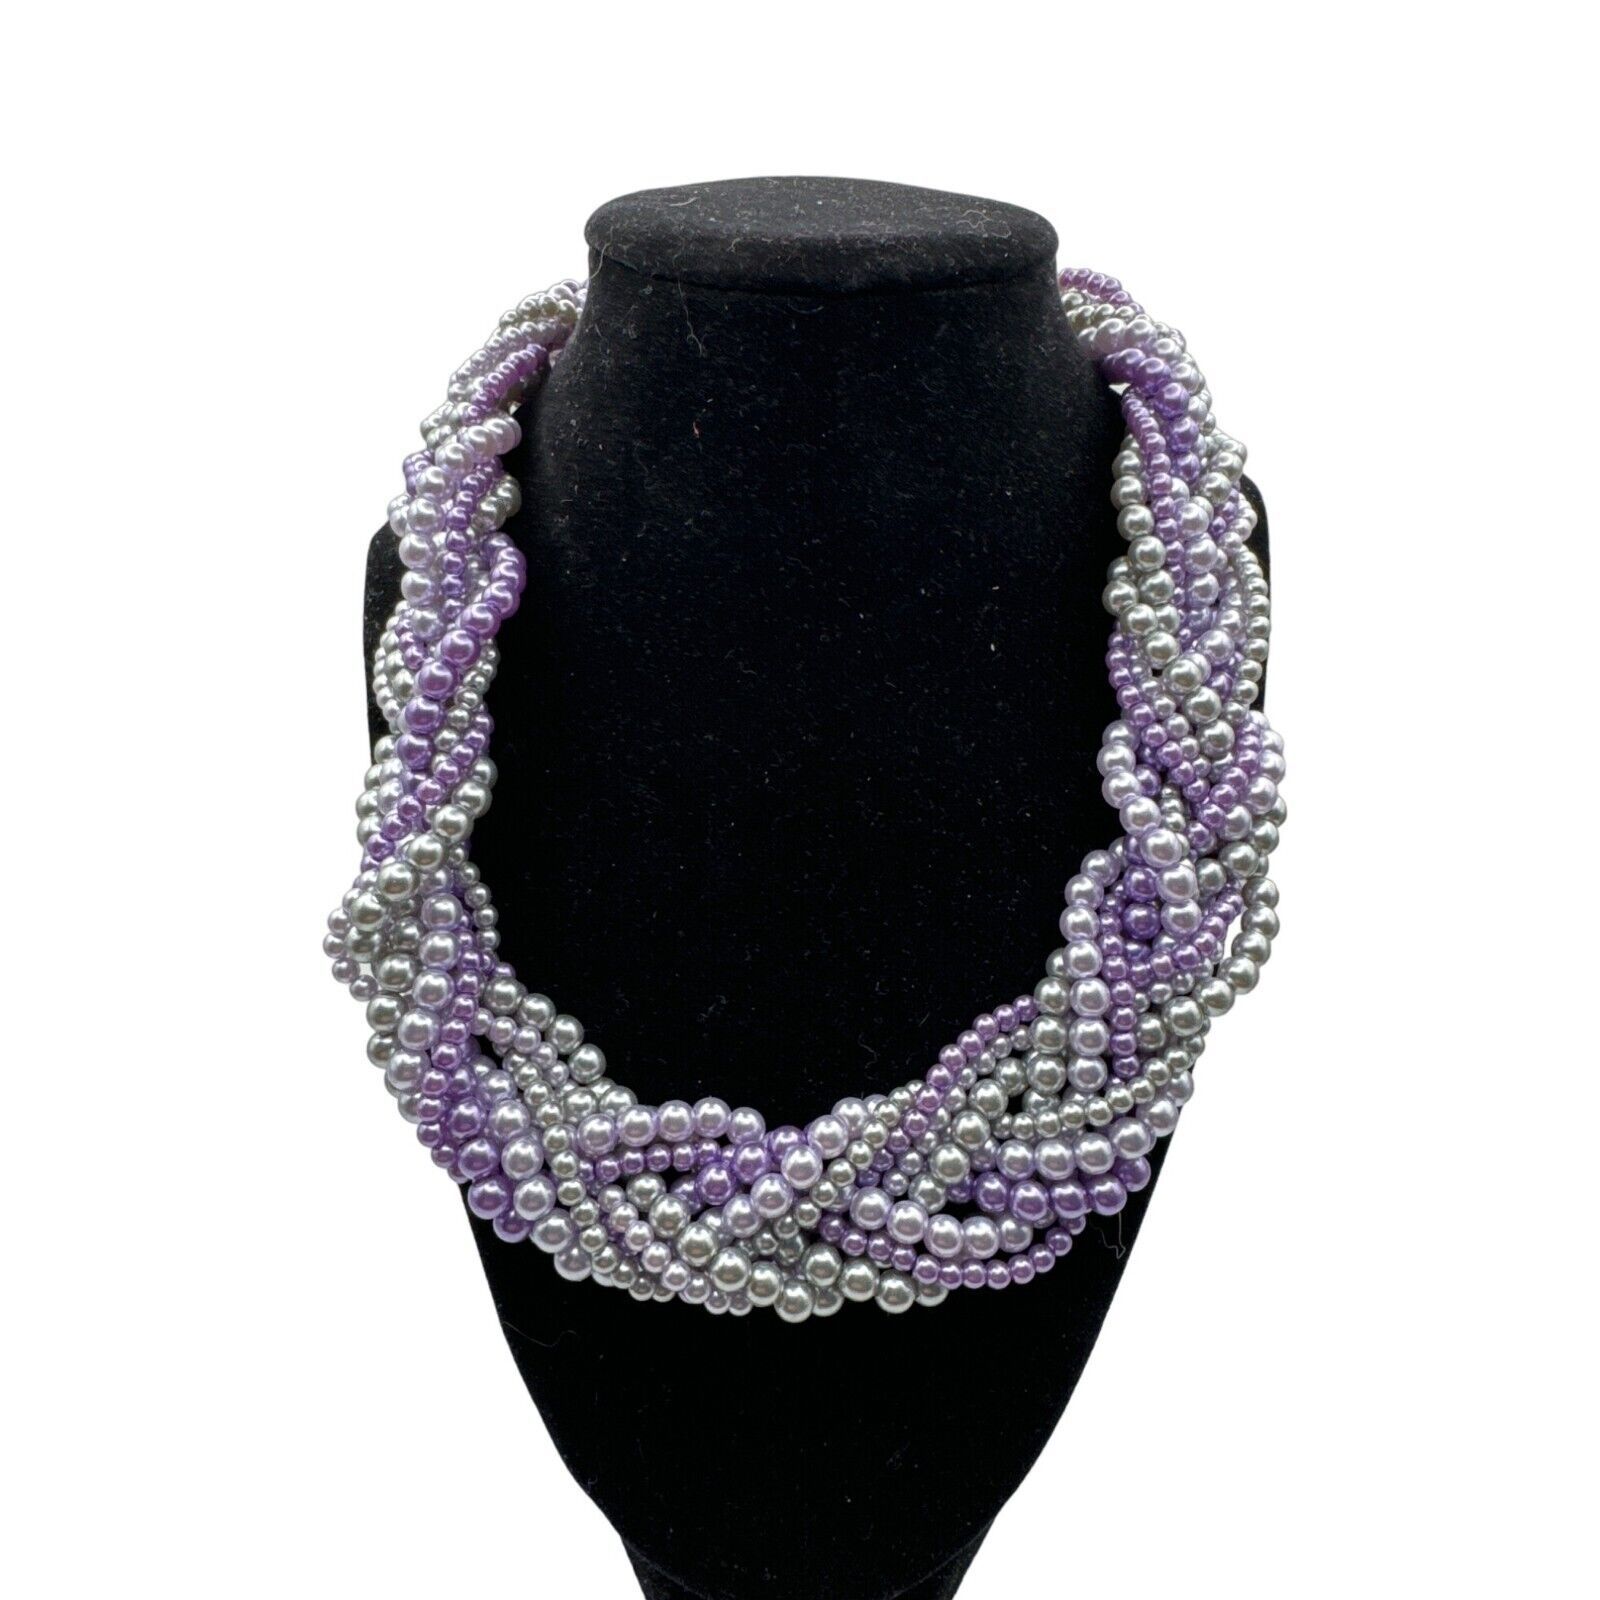 Sophia Collection Shades of Purple and Gray Statement Necklace 17 inch Drop - $18.70